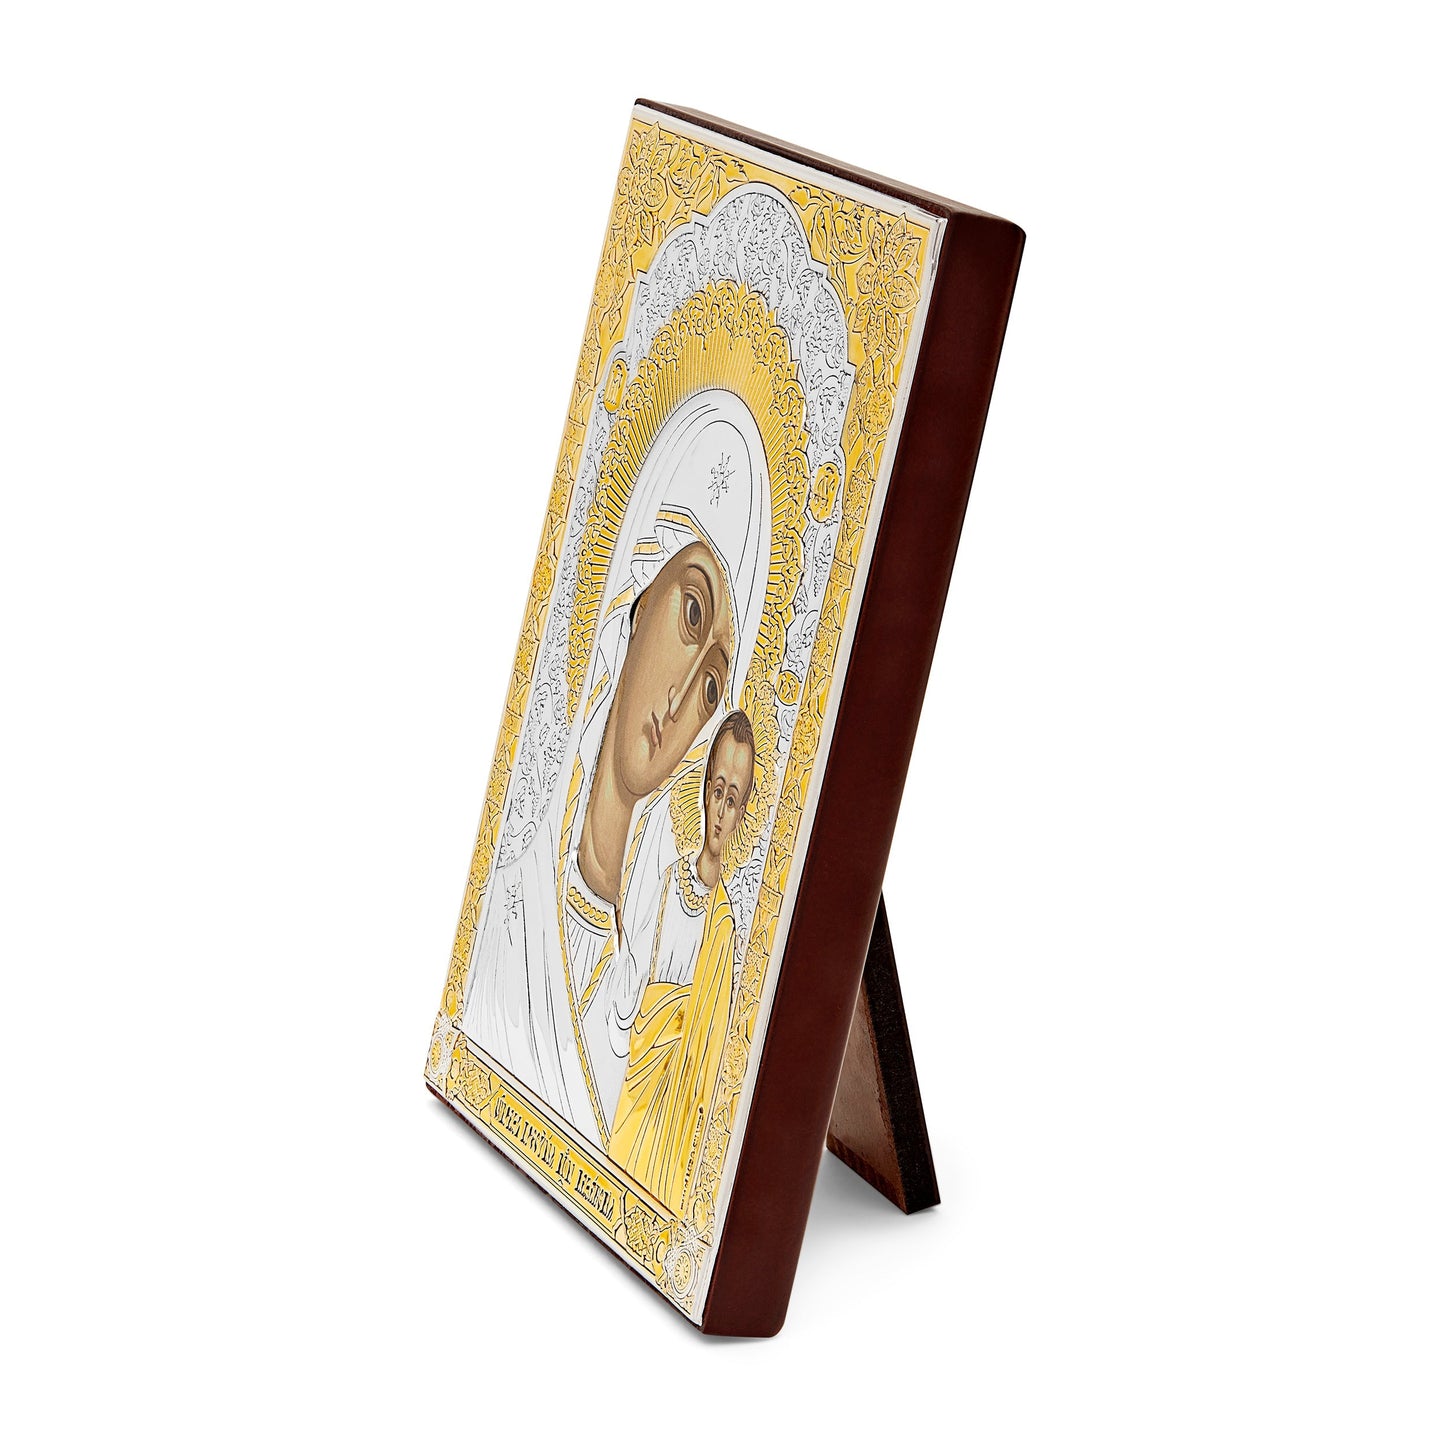 Mondo Cattolico Copy of Colored Wooden Icon of Our Lady of Kazan With Bilaminate Sterling Silver Plaque and Golden Details